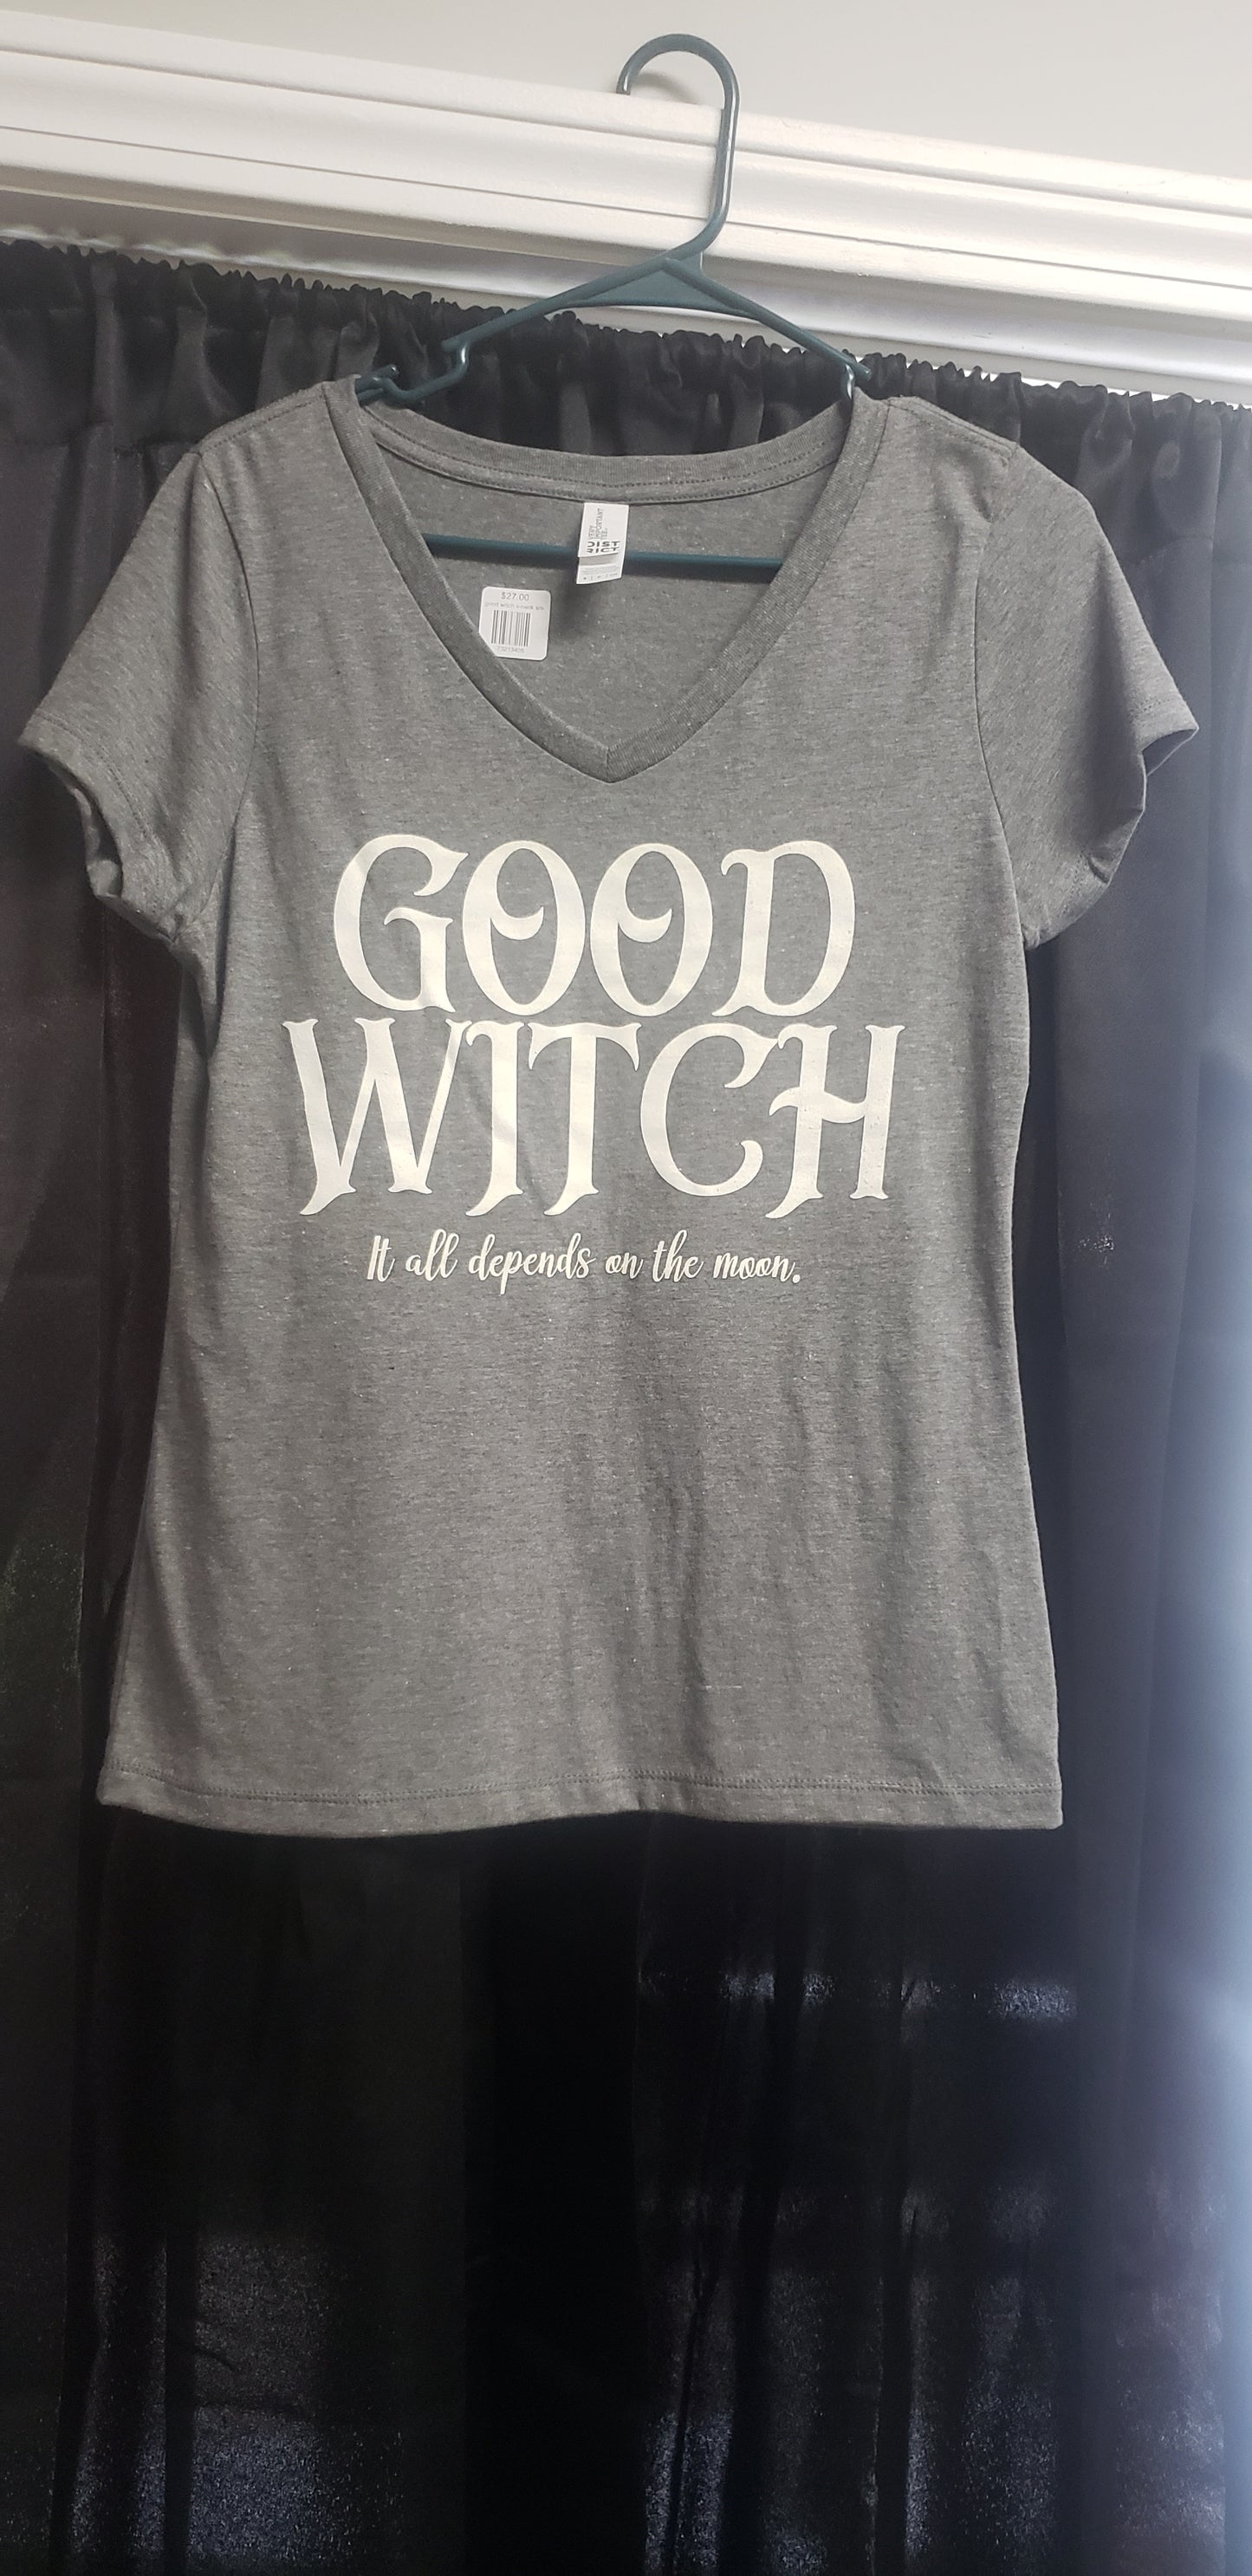 Sister Witch Swag TEE-SHIRTS available